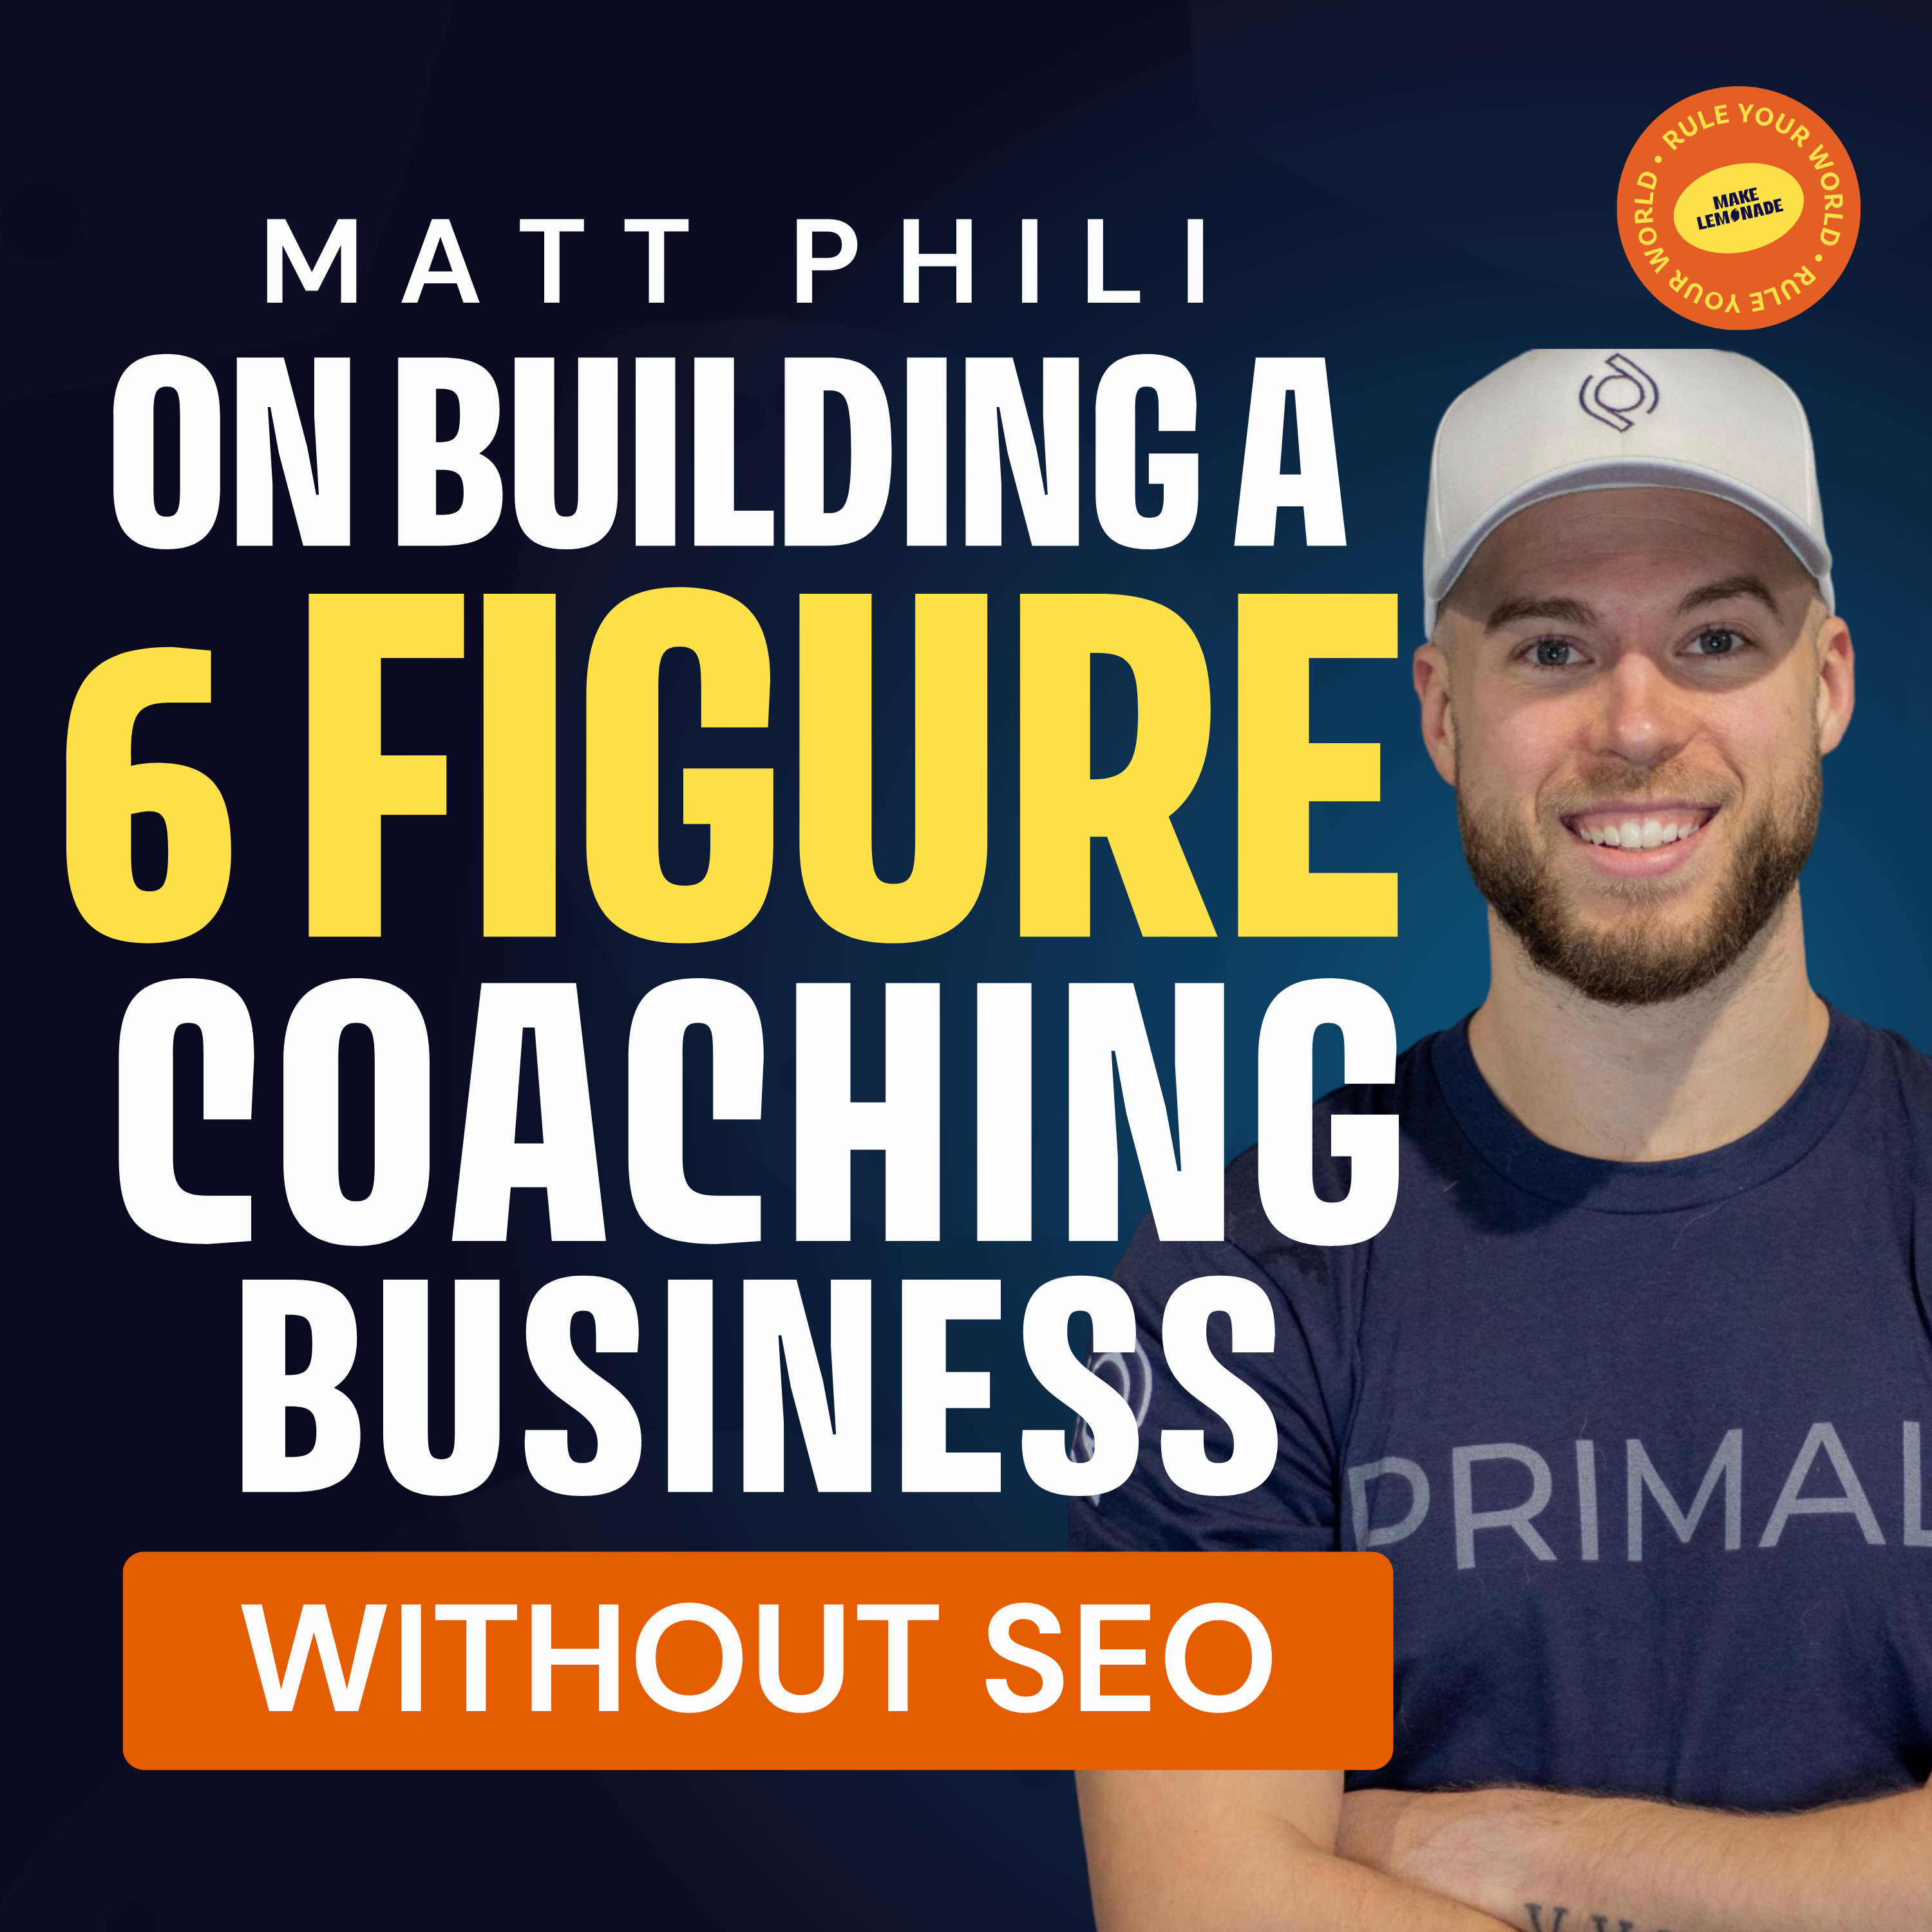 Matt Phili on building a 6 figure coaching business WITHOUT SEO